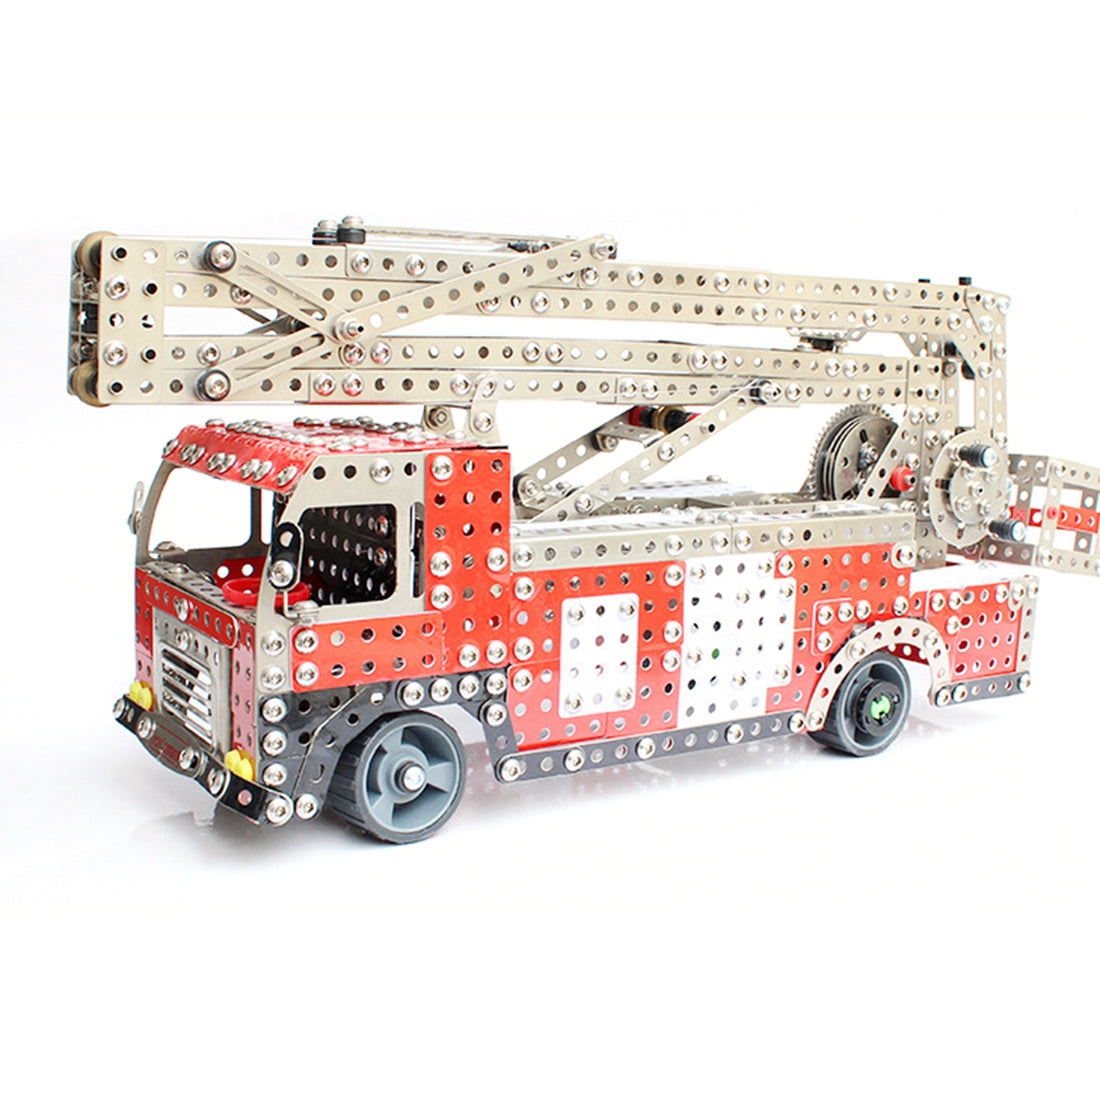 1868PCS Fire Truck Simulation Model DIY Metal Assembly Toy